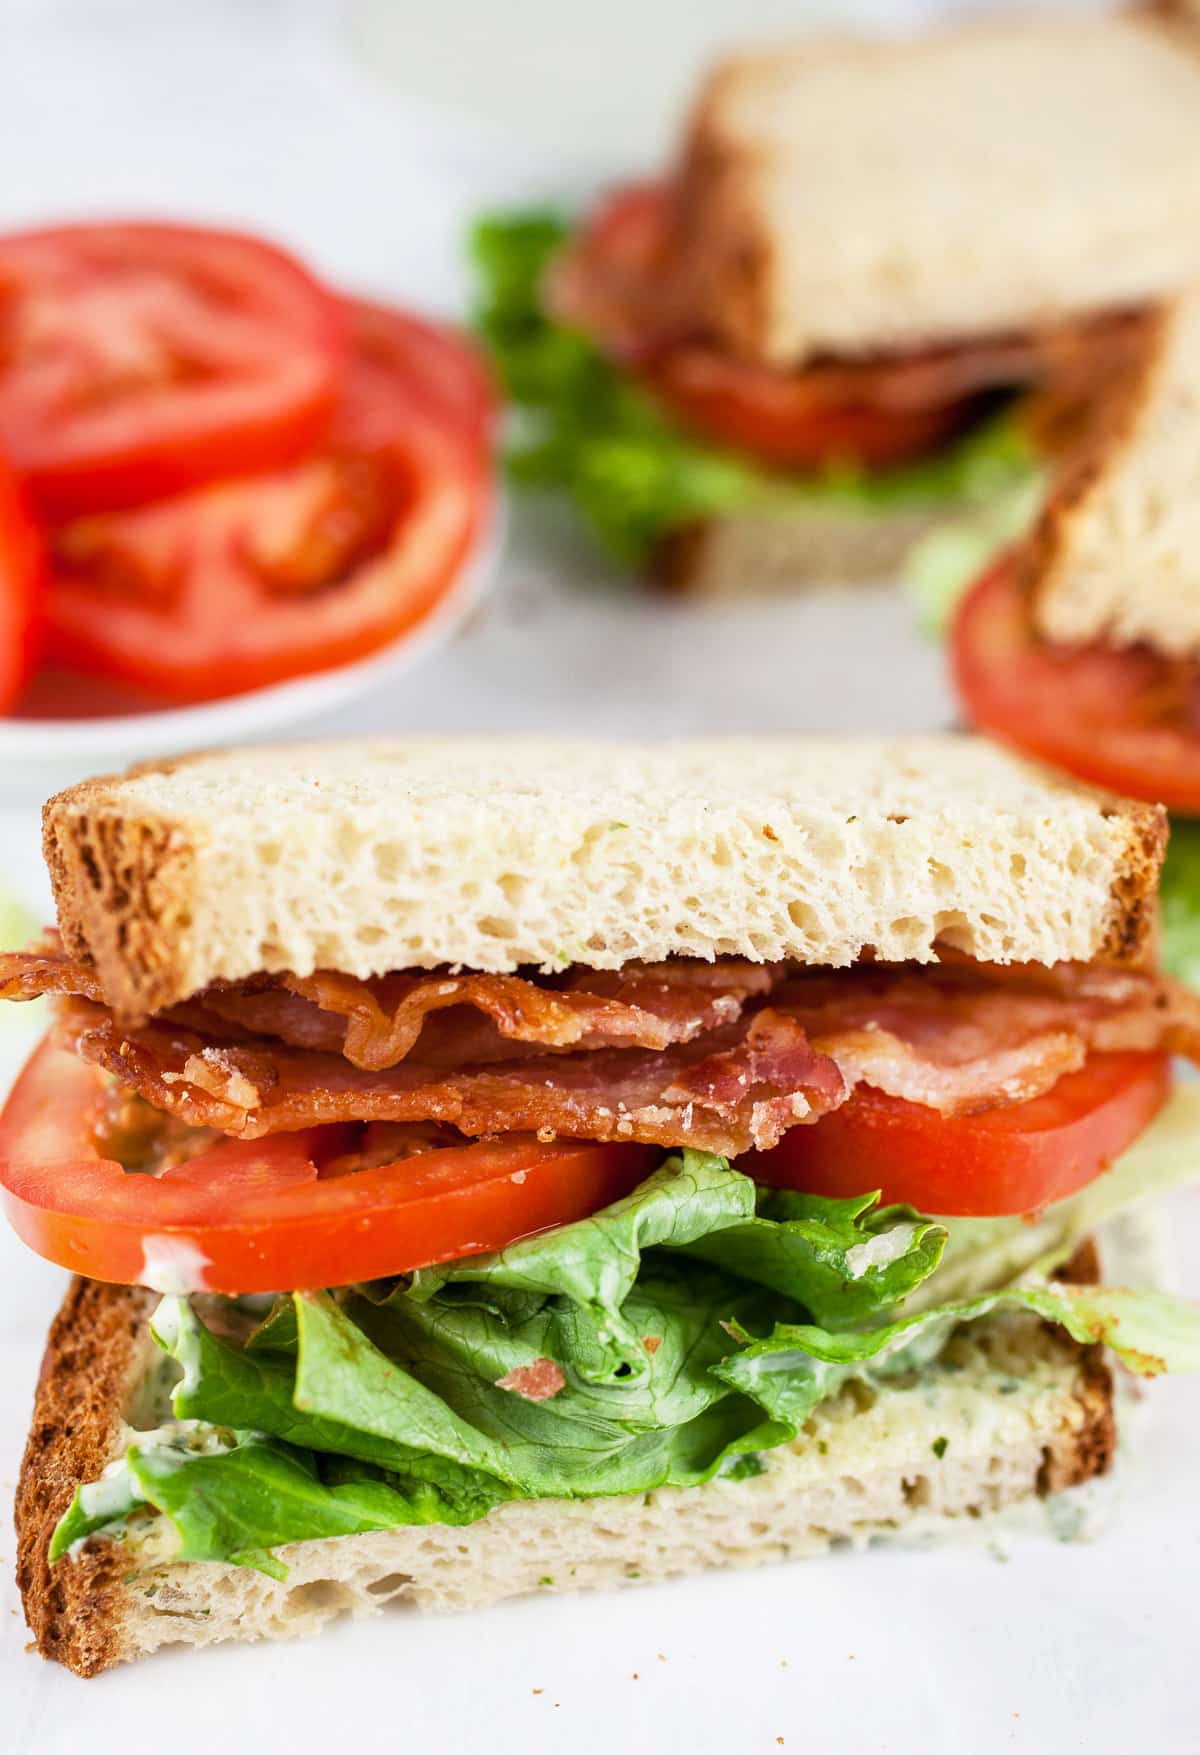 BLT sandwiches cut into halves with tomatoes.